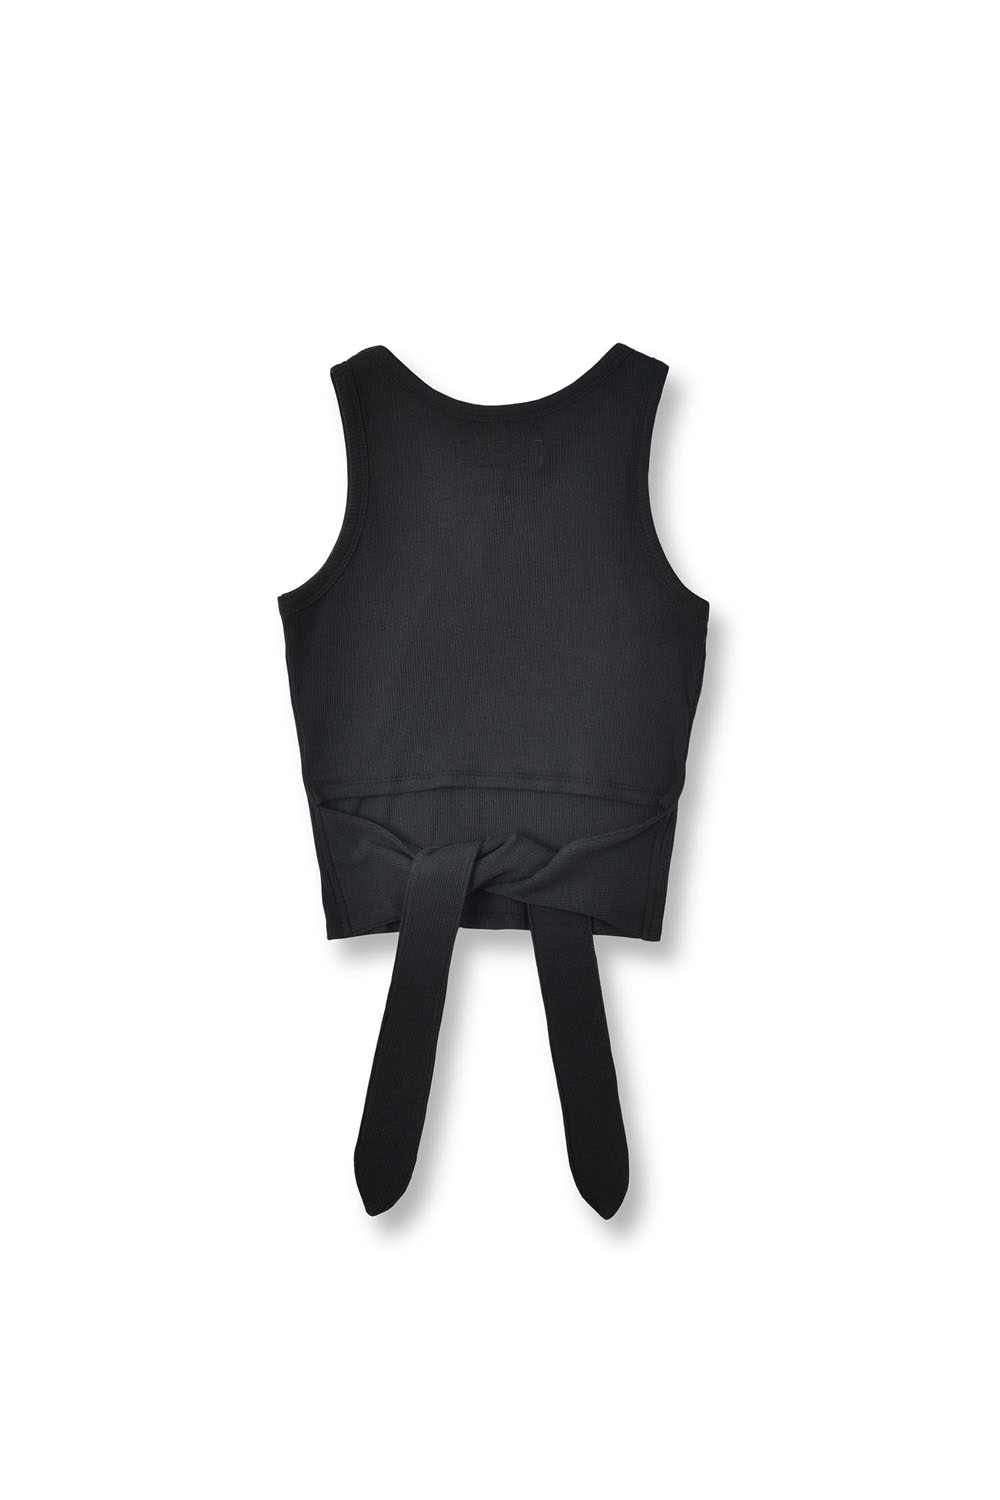 W Ribbed Cut Out Sleeveless_Black